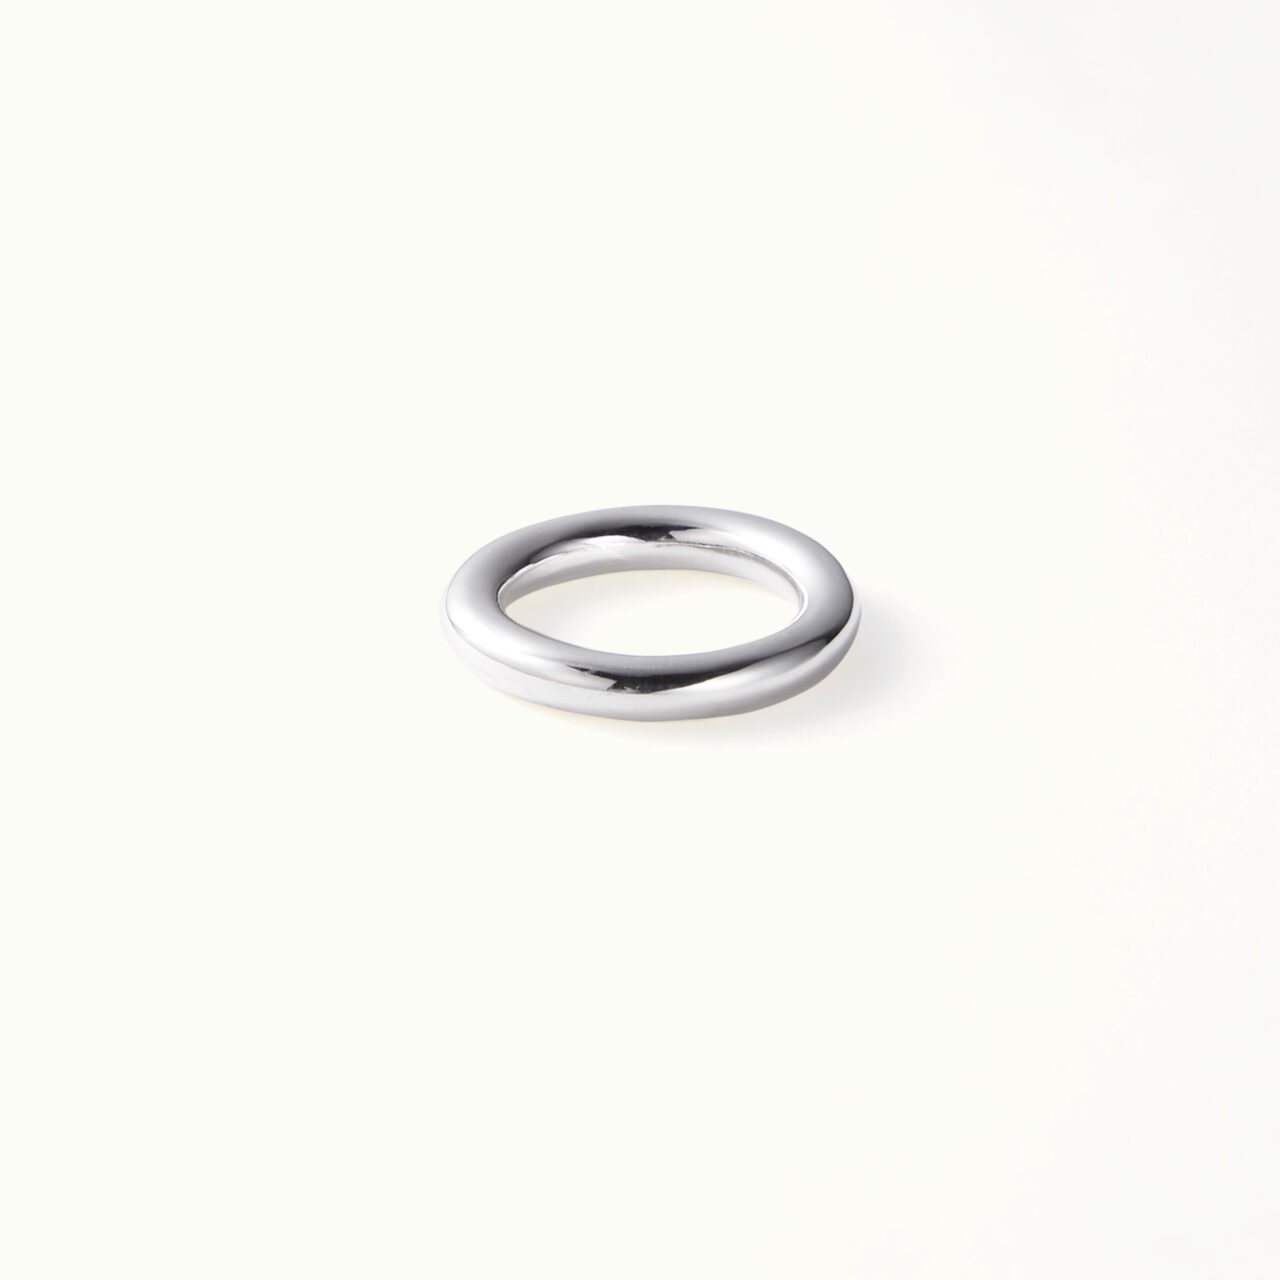 COMMON THICK RING